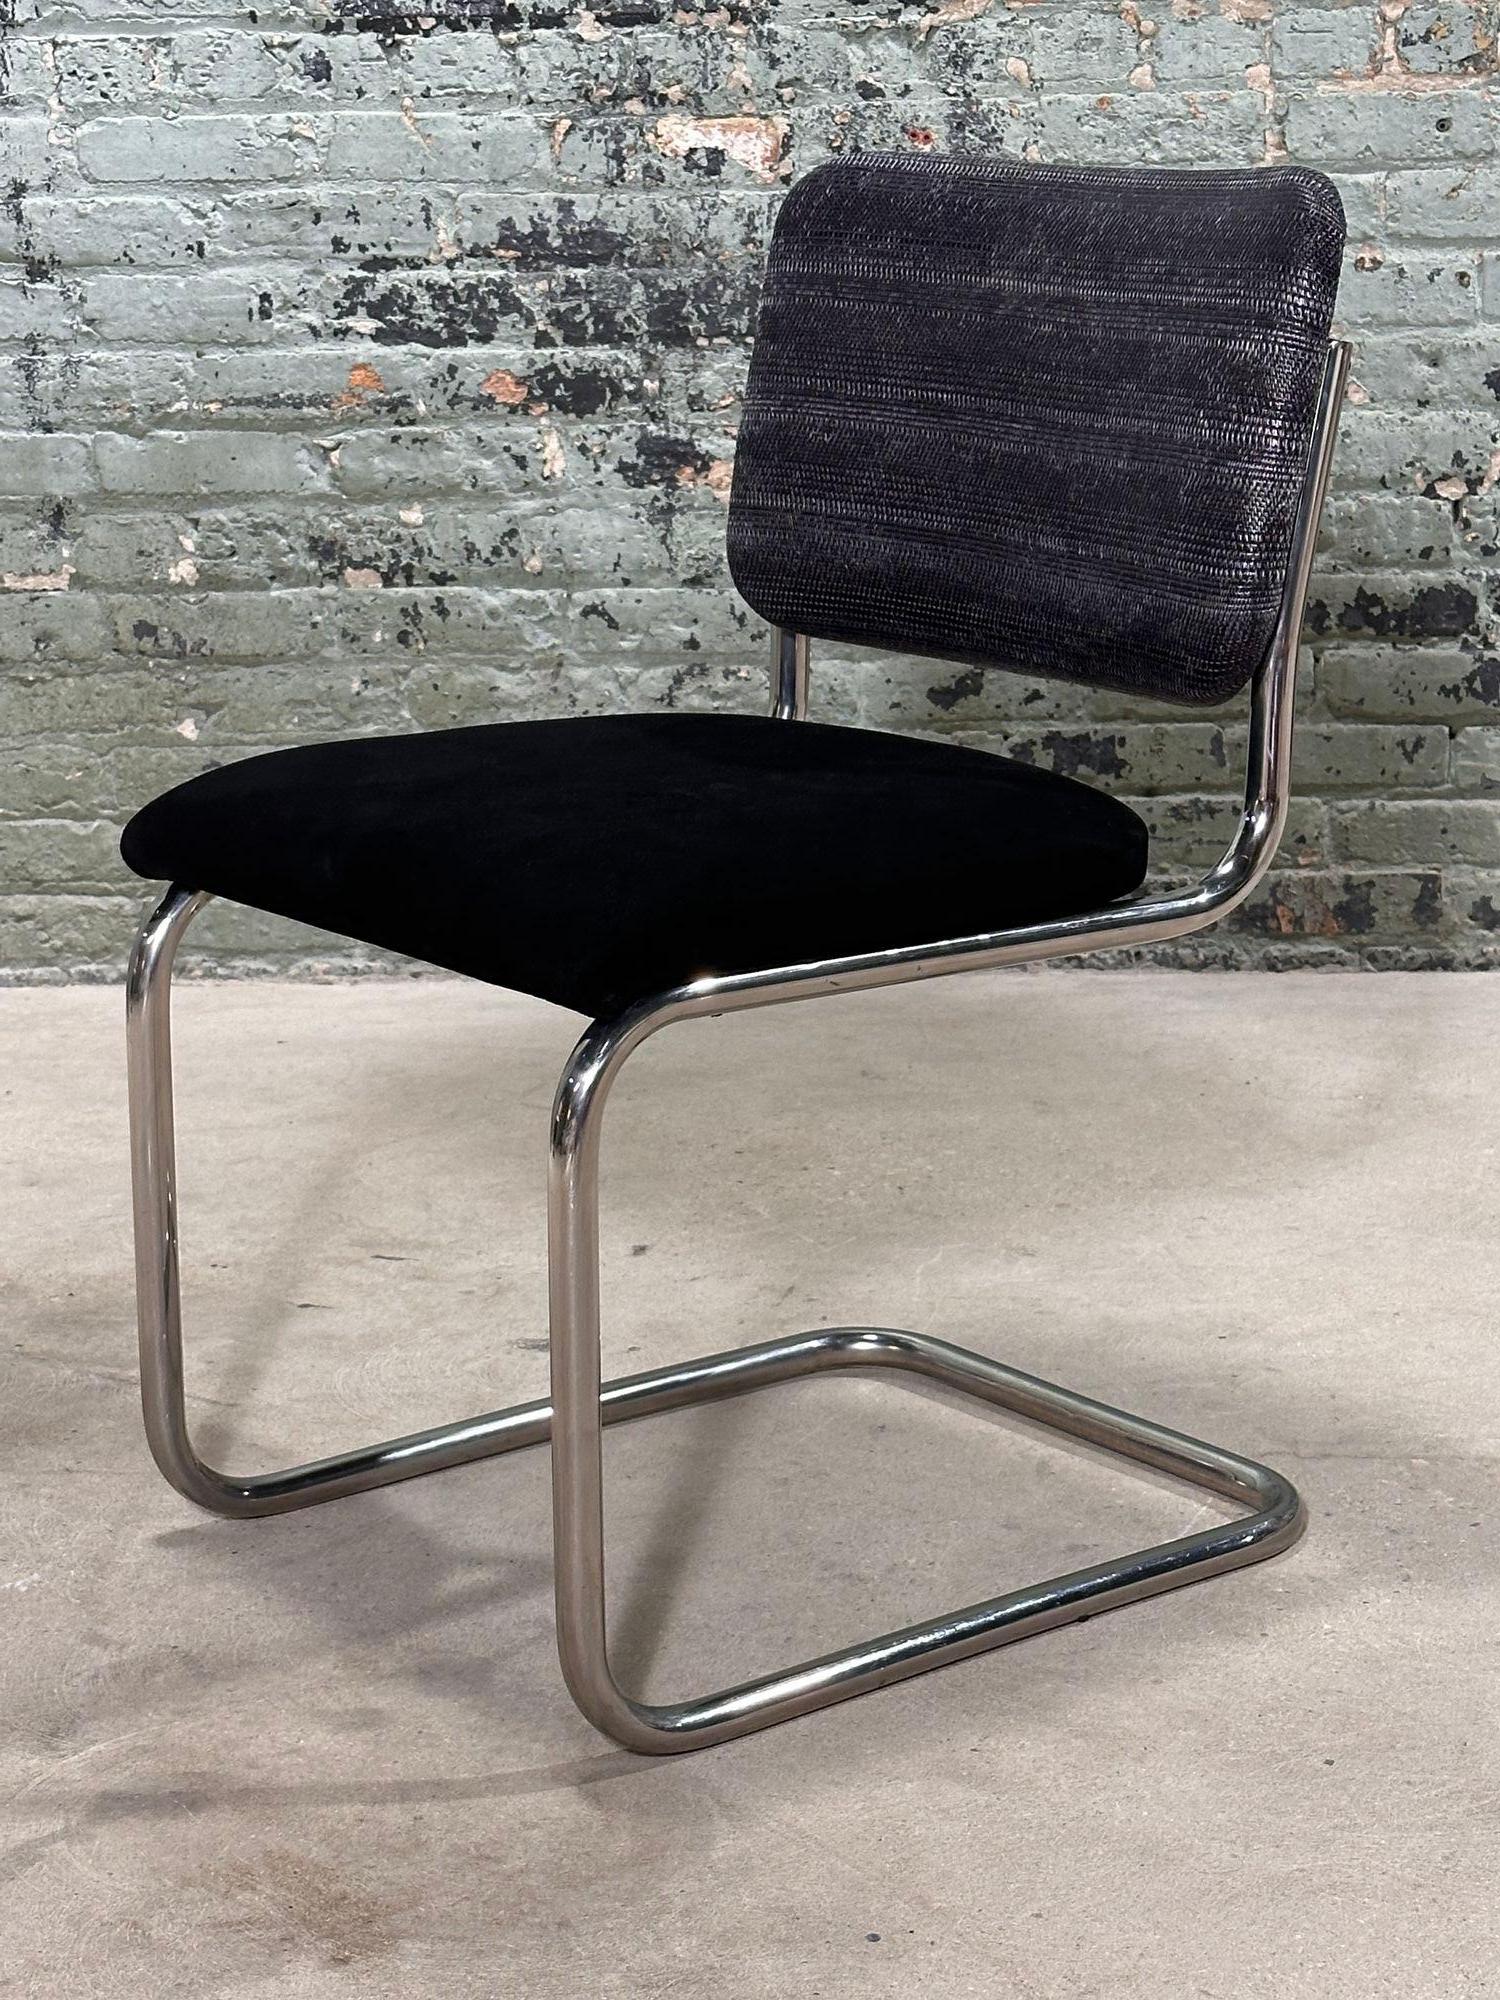 8 Marcel Breuer Cesca Side/Dining Chairs for Knoll, 1980. Dyes hemp and woven leather upholstered backs in the style of Bottega Veneta with black suede seat cushions. Newly upholstered.
Measure 31